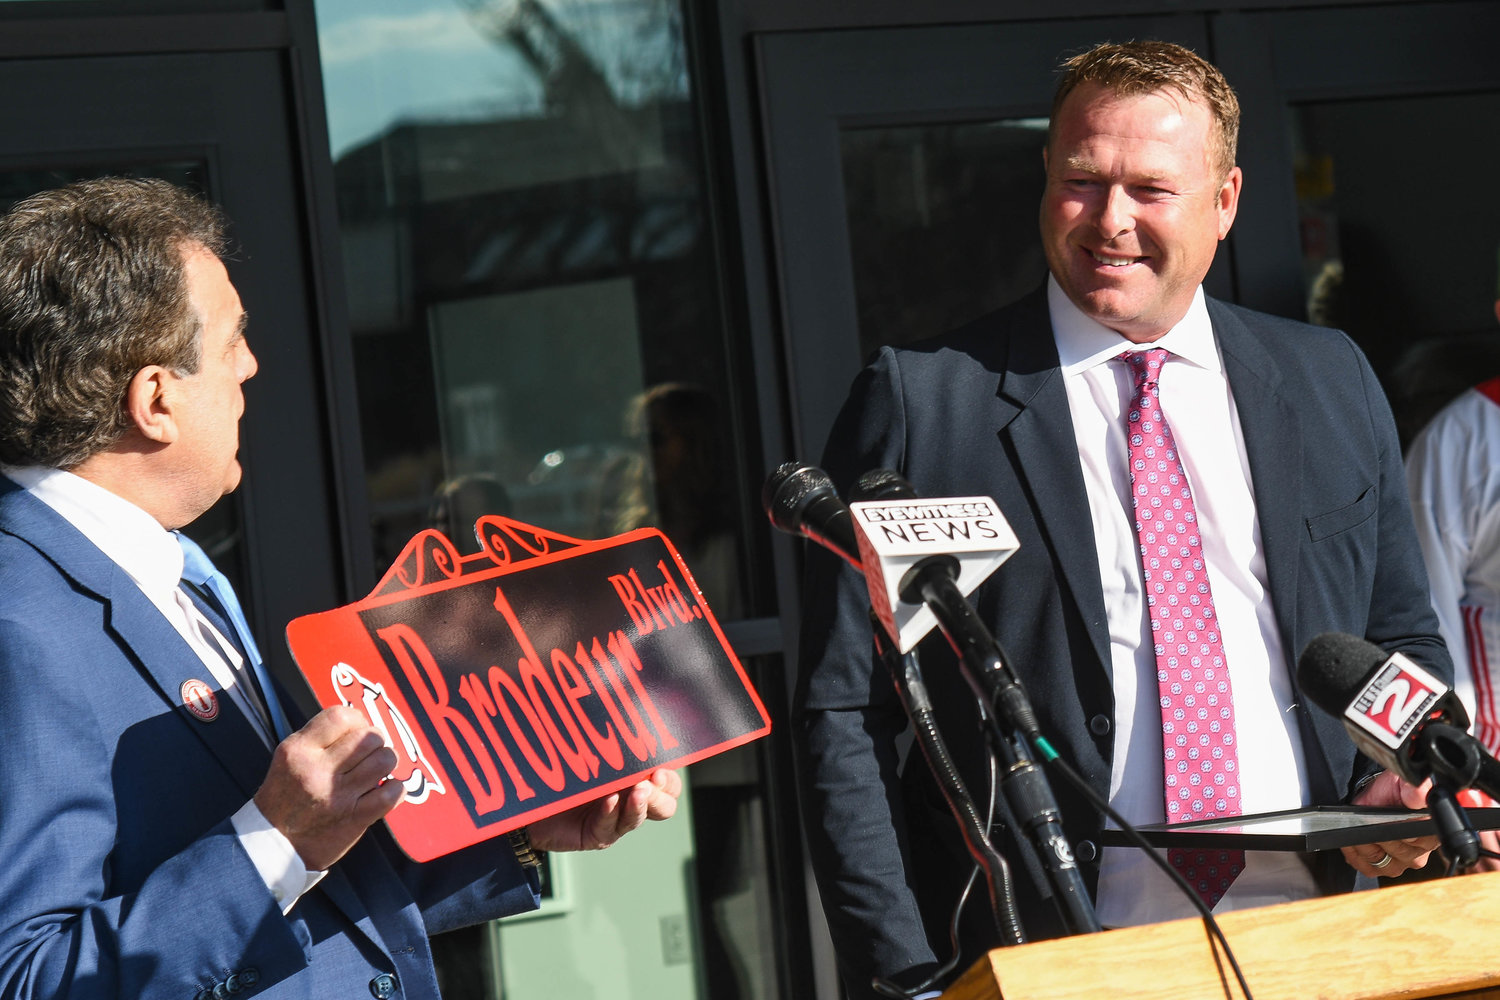 PRESENT — Utica Mayor Robert Palmieri presents former New Jersey Devils and Hall of Fame goalie Martin Brodeur — who played one season in Utica in 1992-93 — with a special sign during a ceremony Wednesday outside of the Adirondack Bank Center at the Utica Memorial Auditorium.